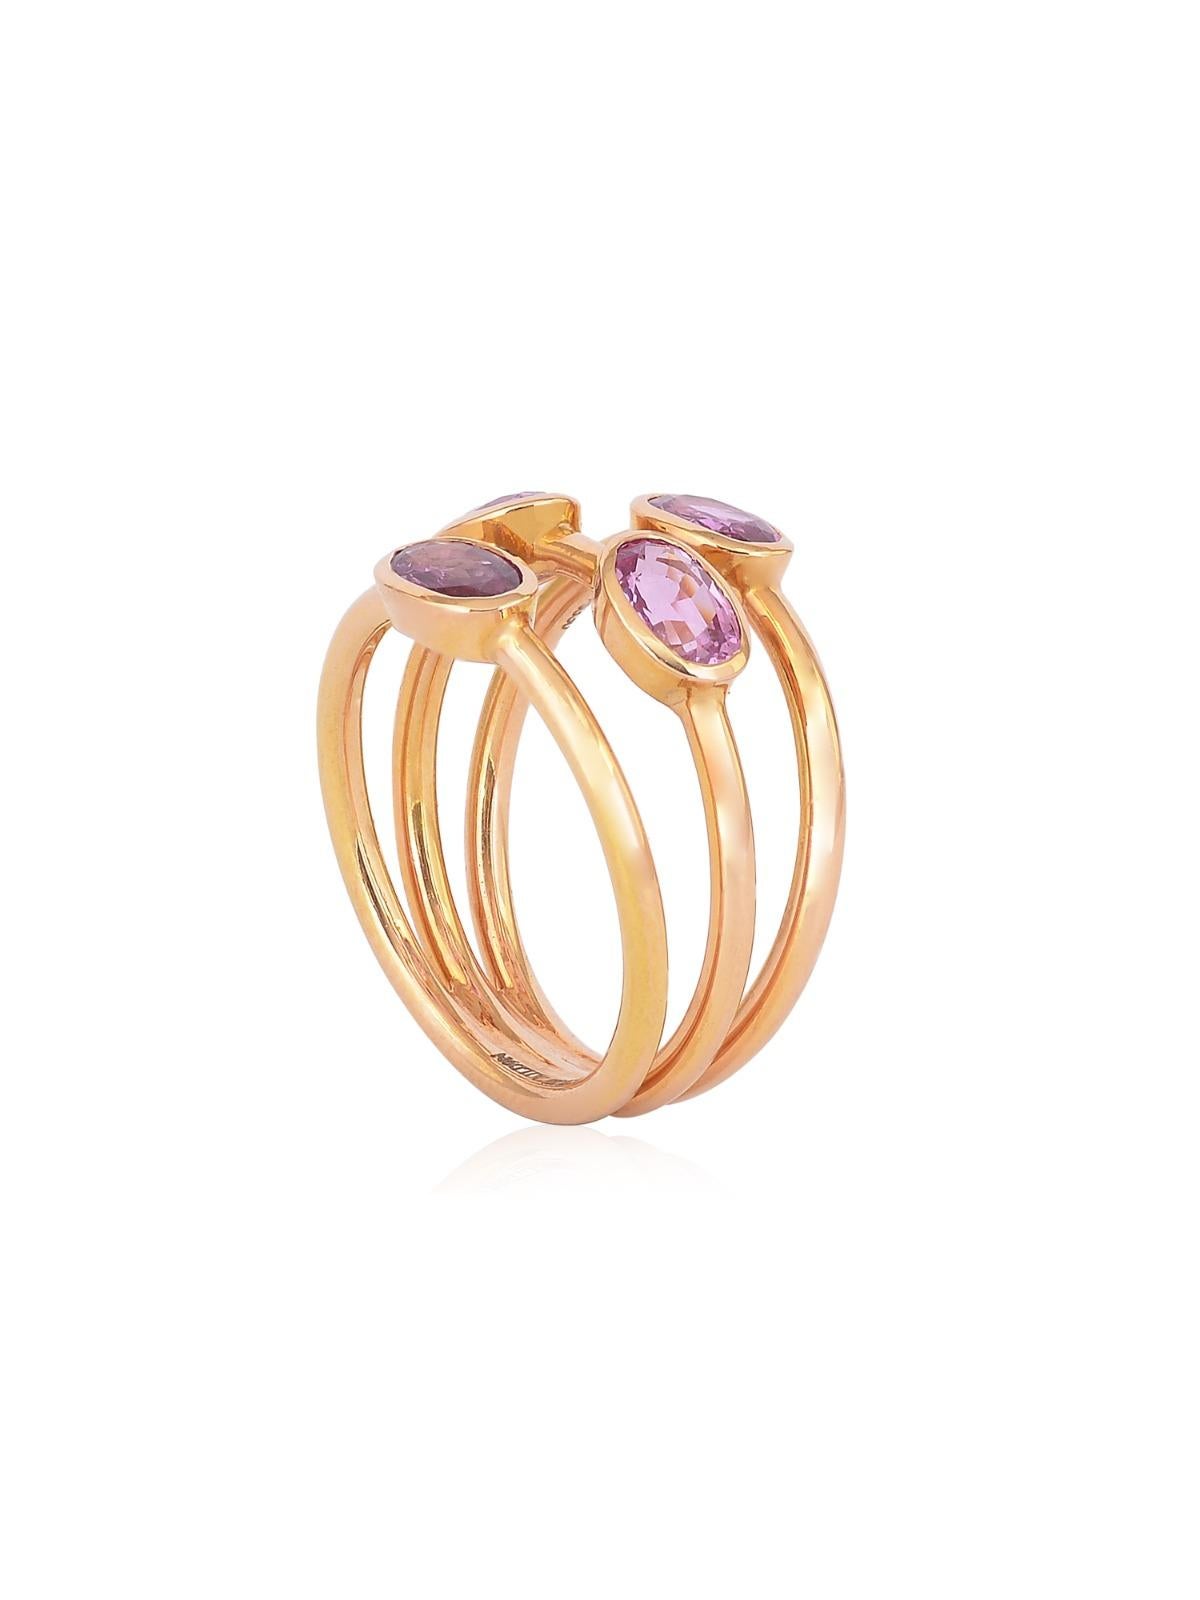 Set in 18k gold and handcrafted with pink sapphires, this three band ring is a treat for the wearer.  Pink sapphires are trending as one of the hottest stones of the seasons, and the ring complements the beautiful tones of pink with the perfect